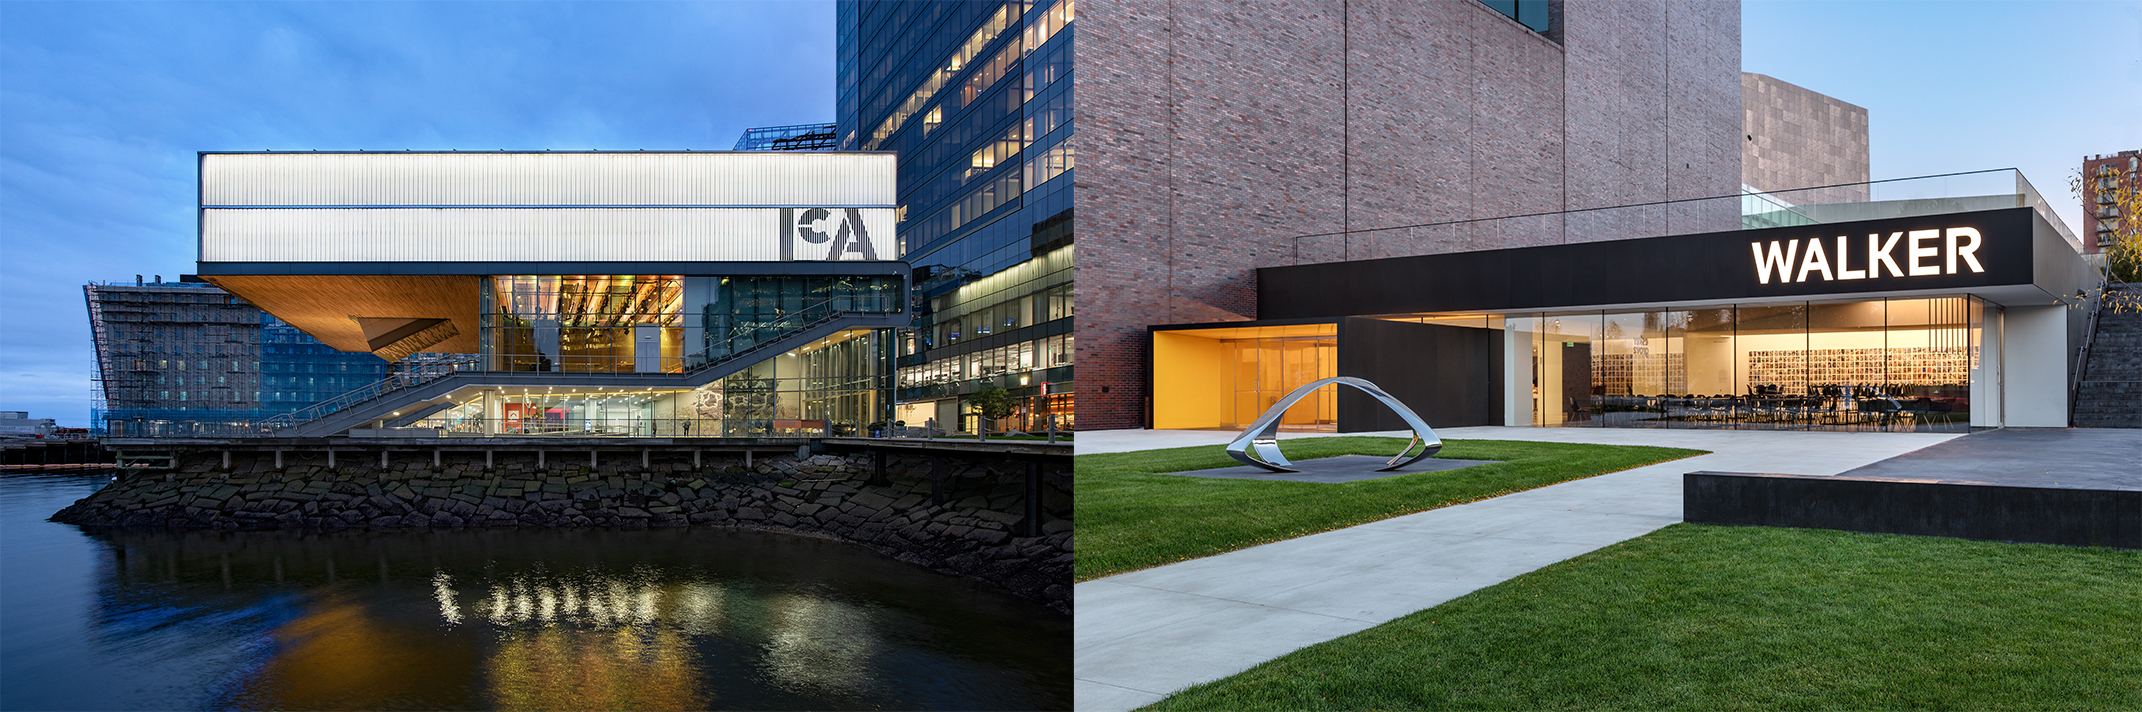 A side by side photo of the ICA building and the Walker Art Museum building.